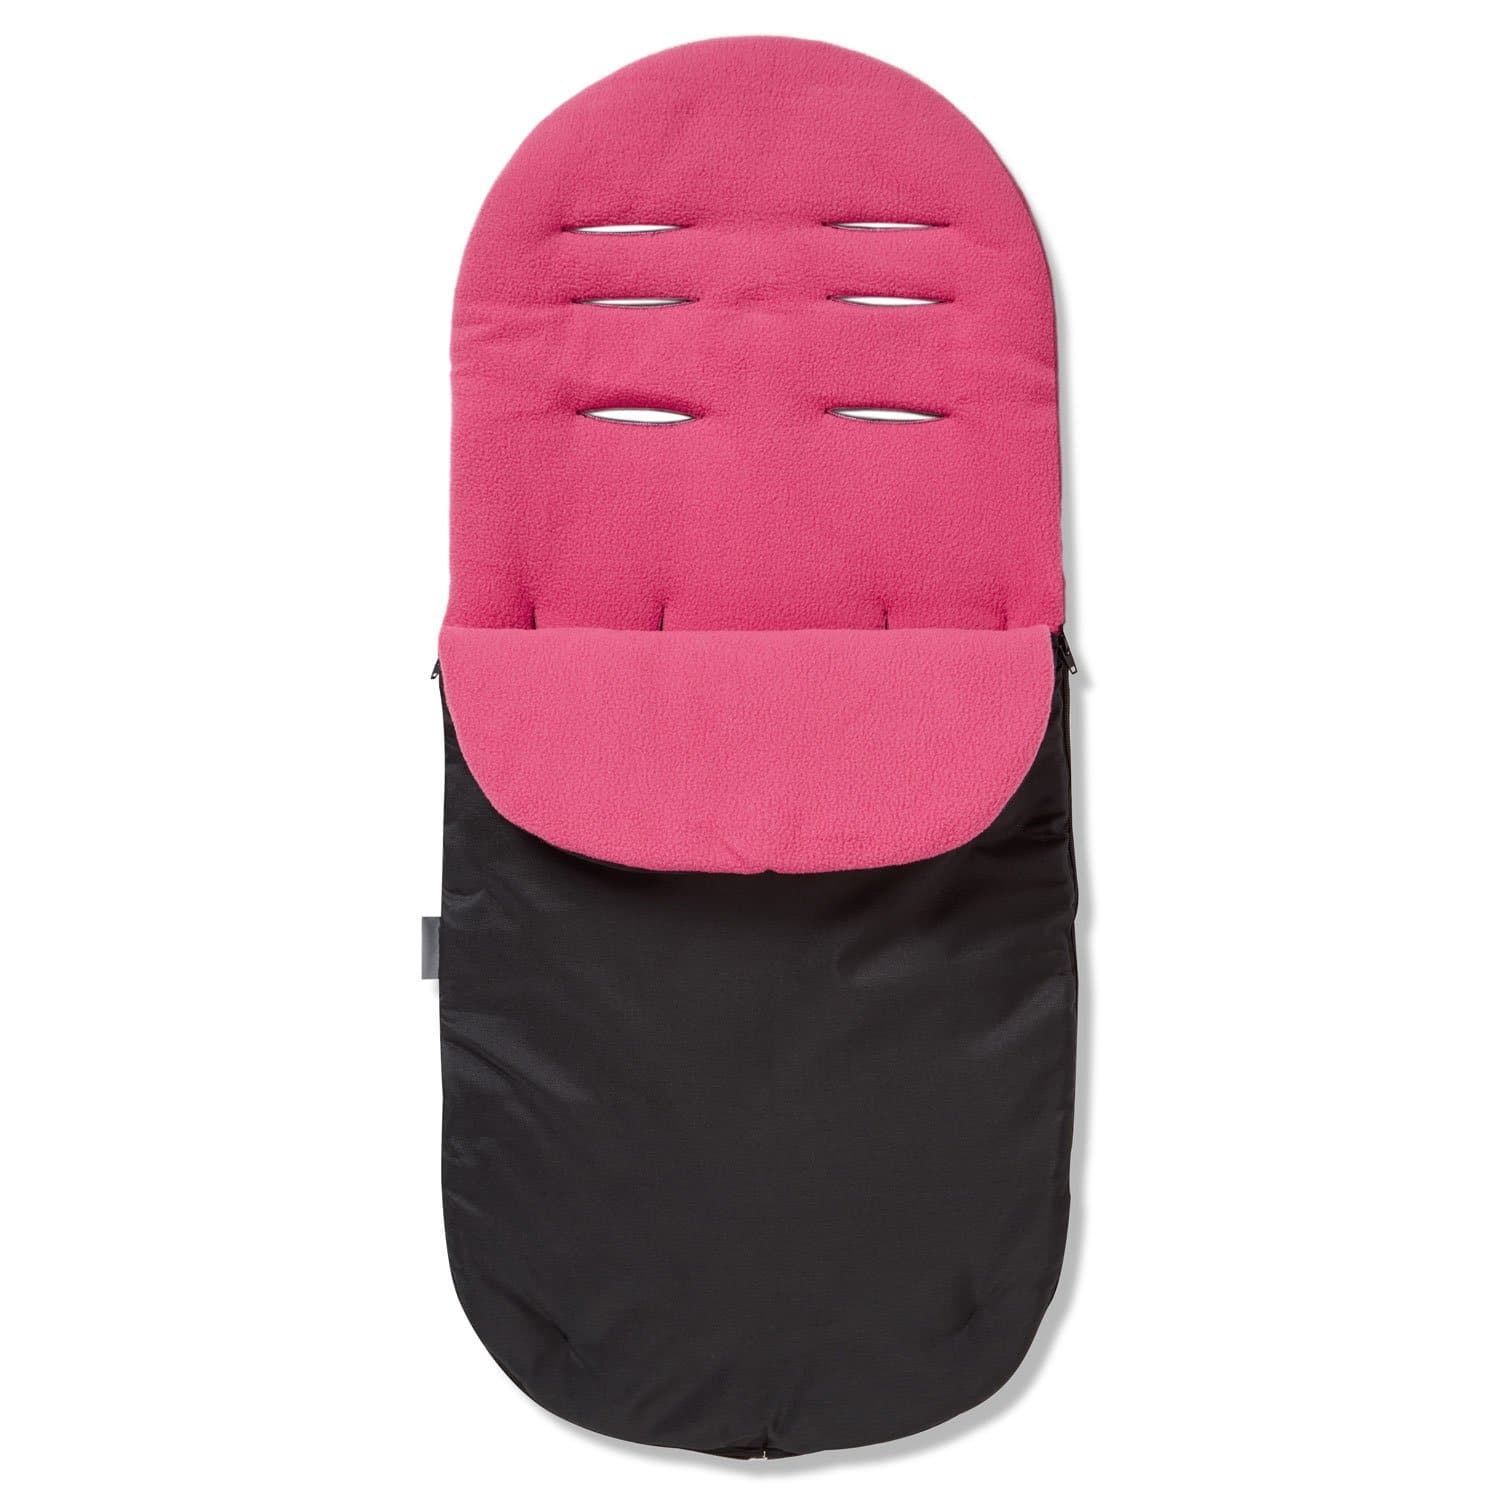 Footmuff / Cosy Toes Compatible with Orbit - Dark Pink / Fits All Models | For Your Little One